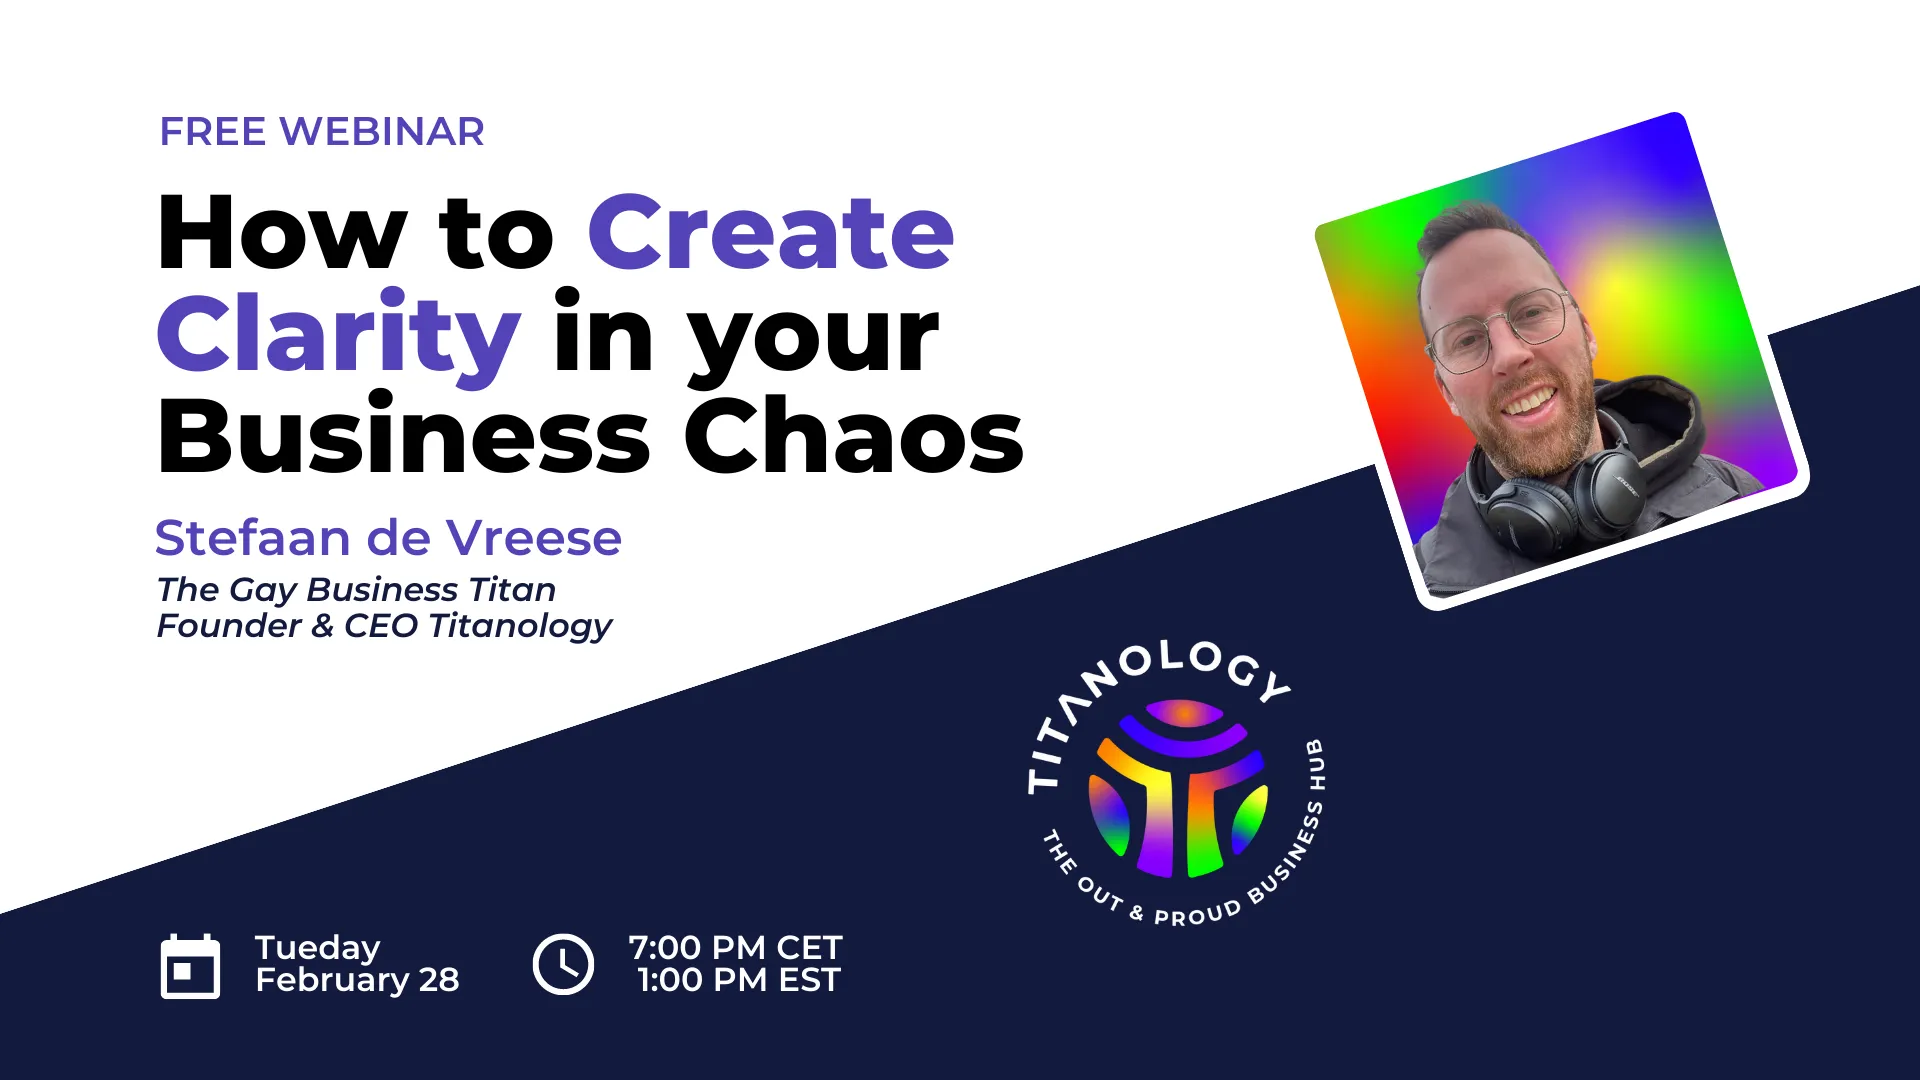 Free Webinar - Create Clarity in Your Business Chaos